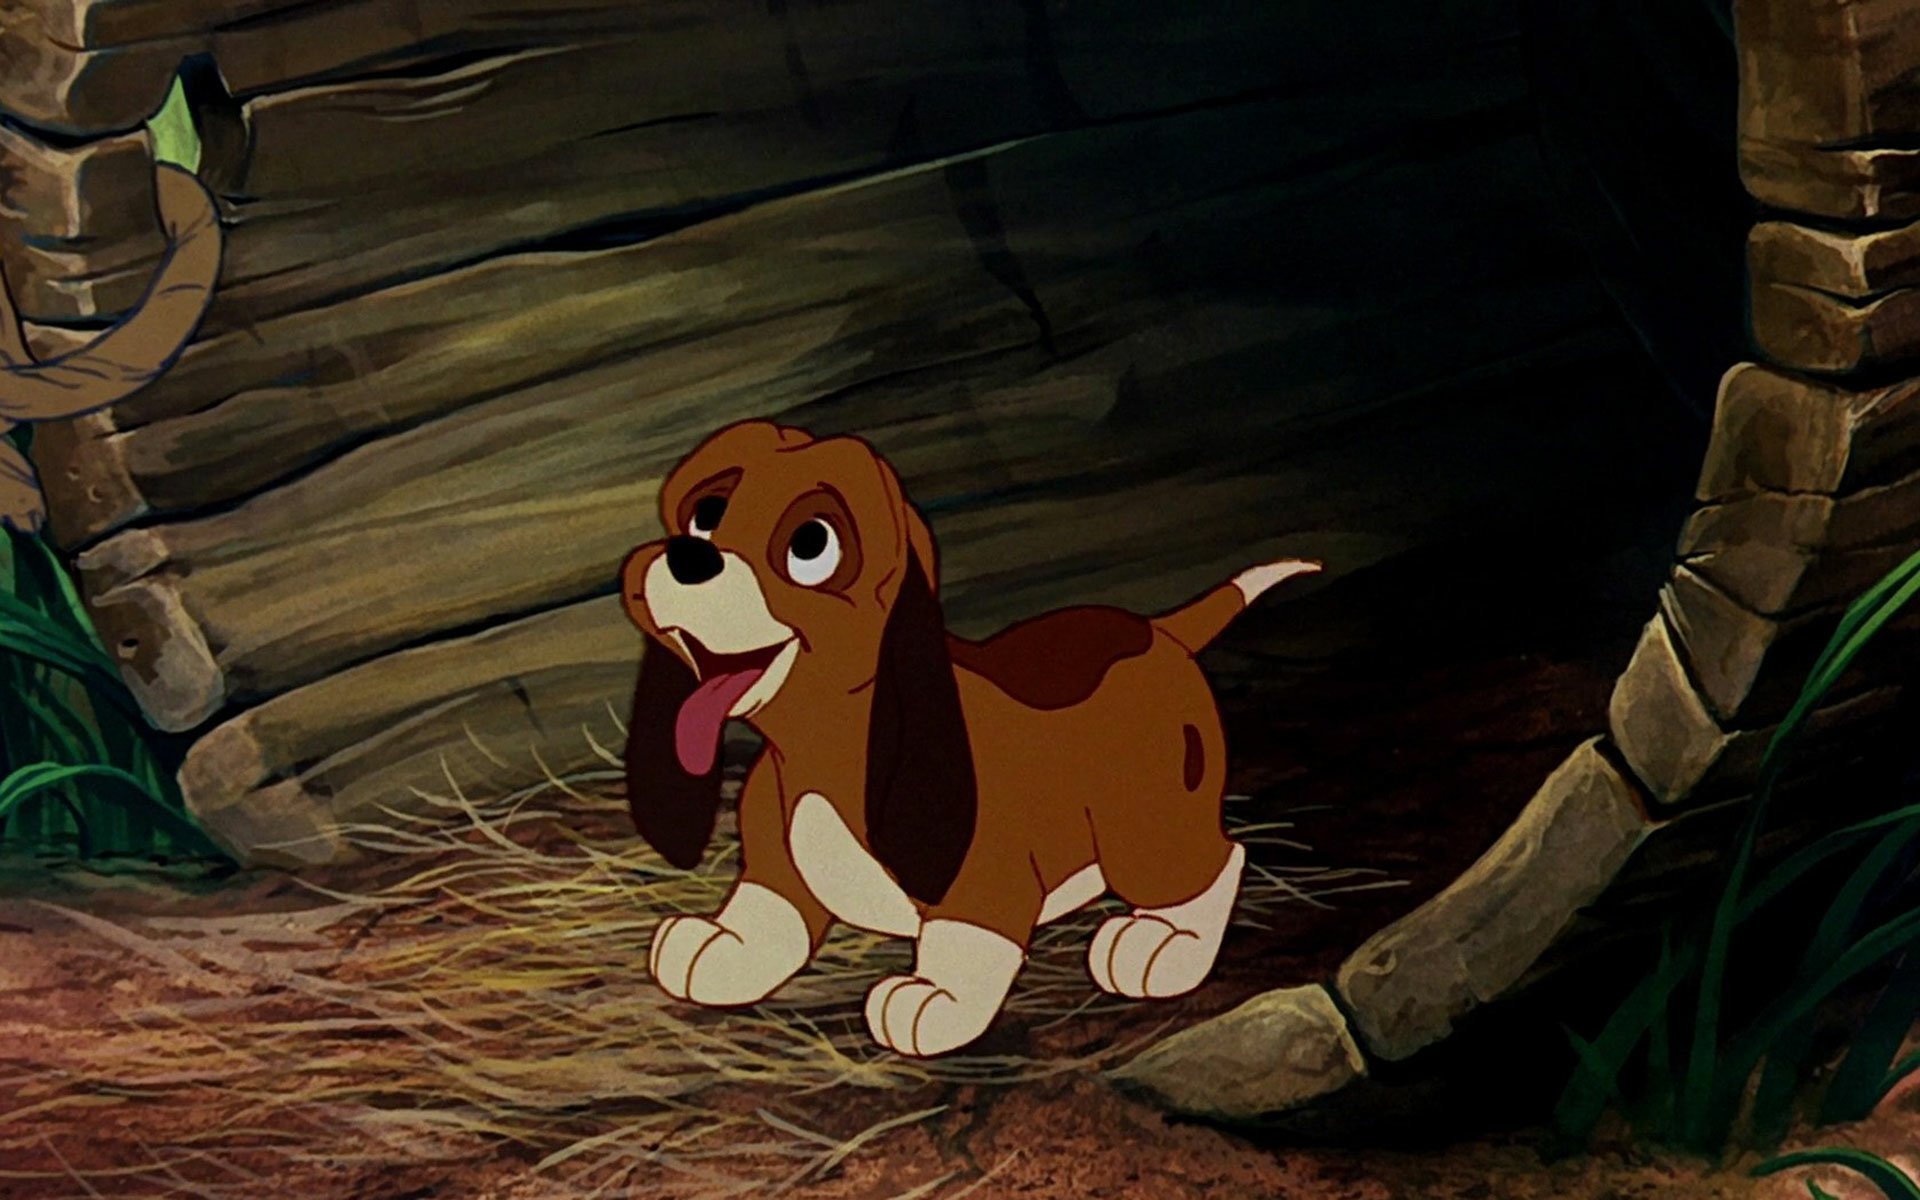 Movie The Fox and the Hound HD Wallpaper